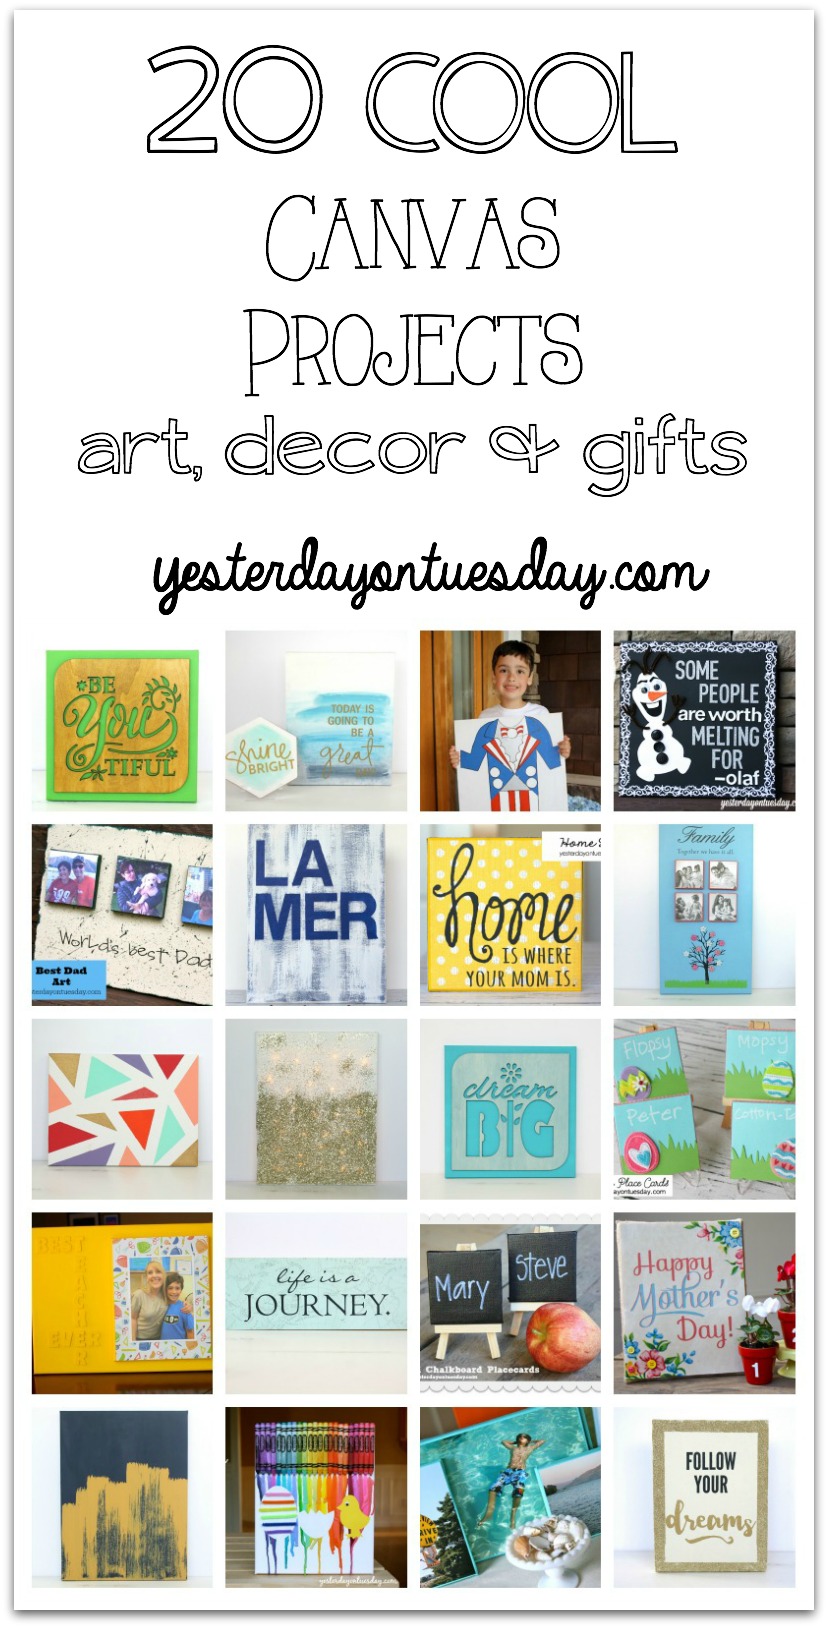 20 Cool Canvas Projects